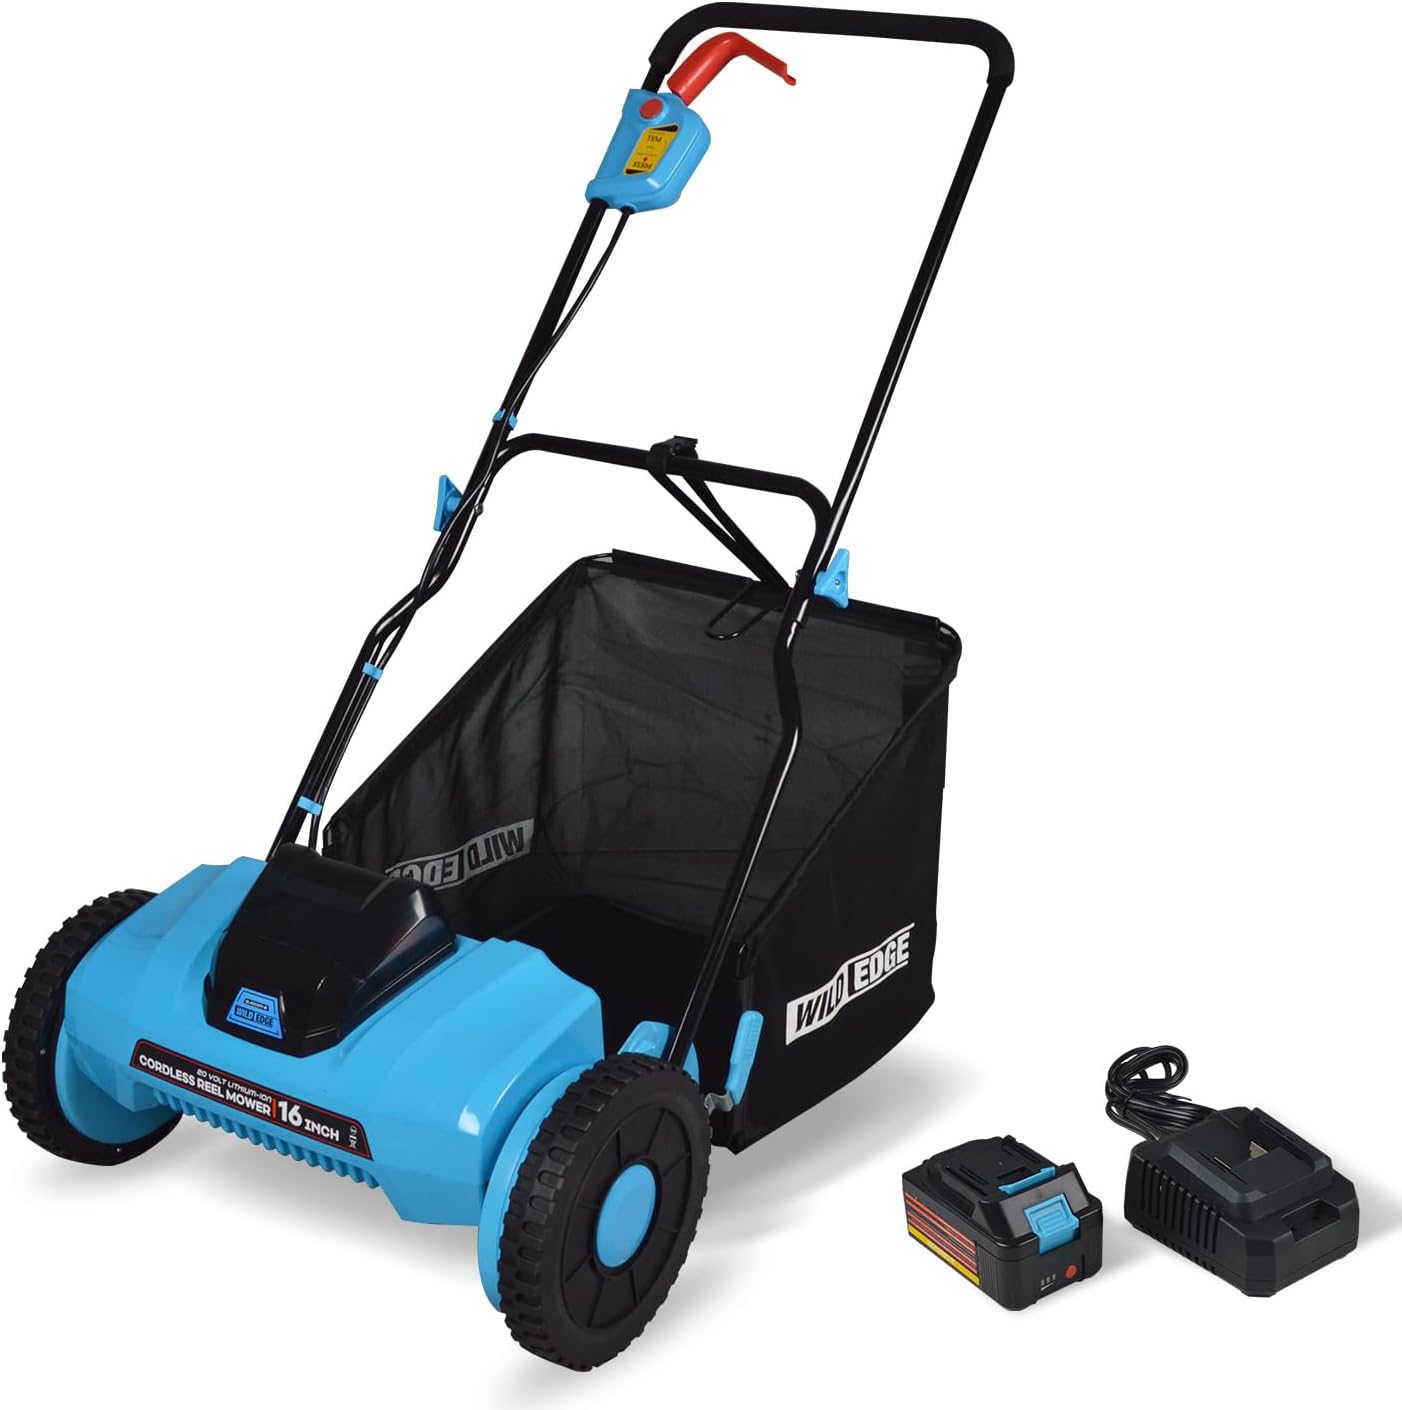 Wild Edge Battery Reel Mower, 16-Inch 20-Volt Lithium-Ion Cordless Pus –  Dick's Pawn Superstore